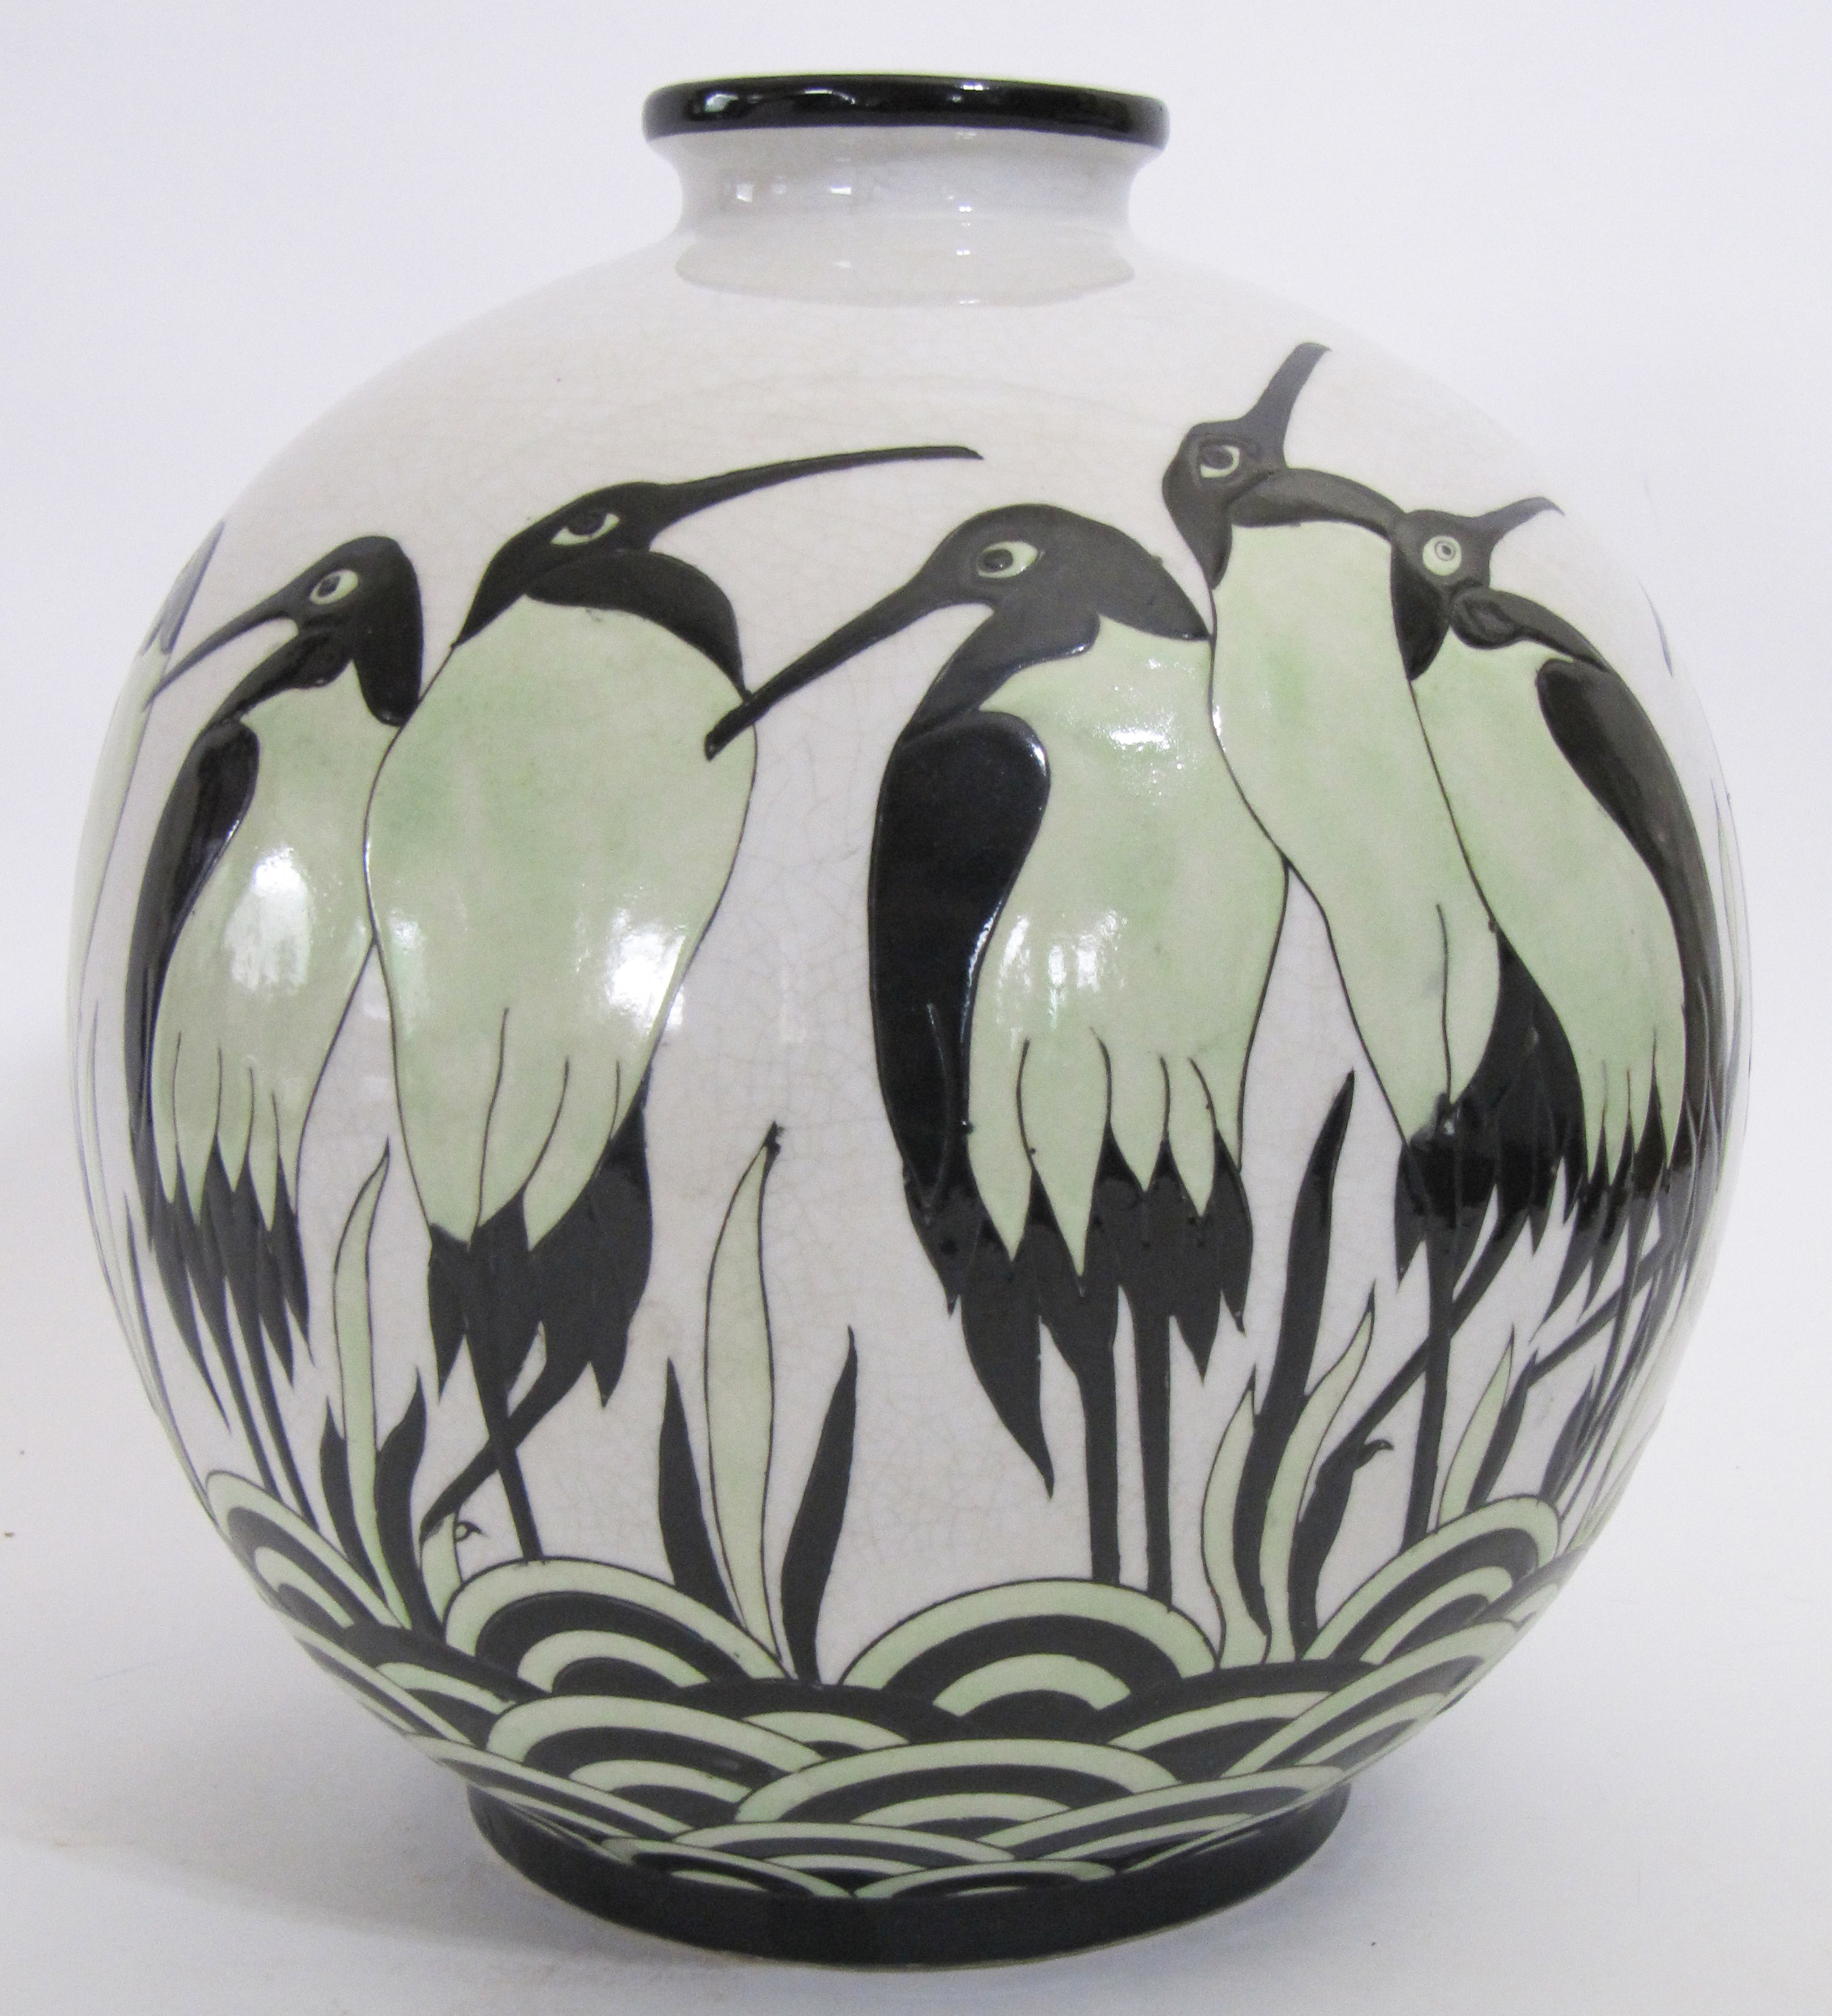 A Keralouve Stork vase, incised Art Deco pattern in green and black glaze on white ground. 30cm H